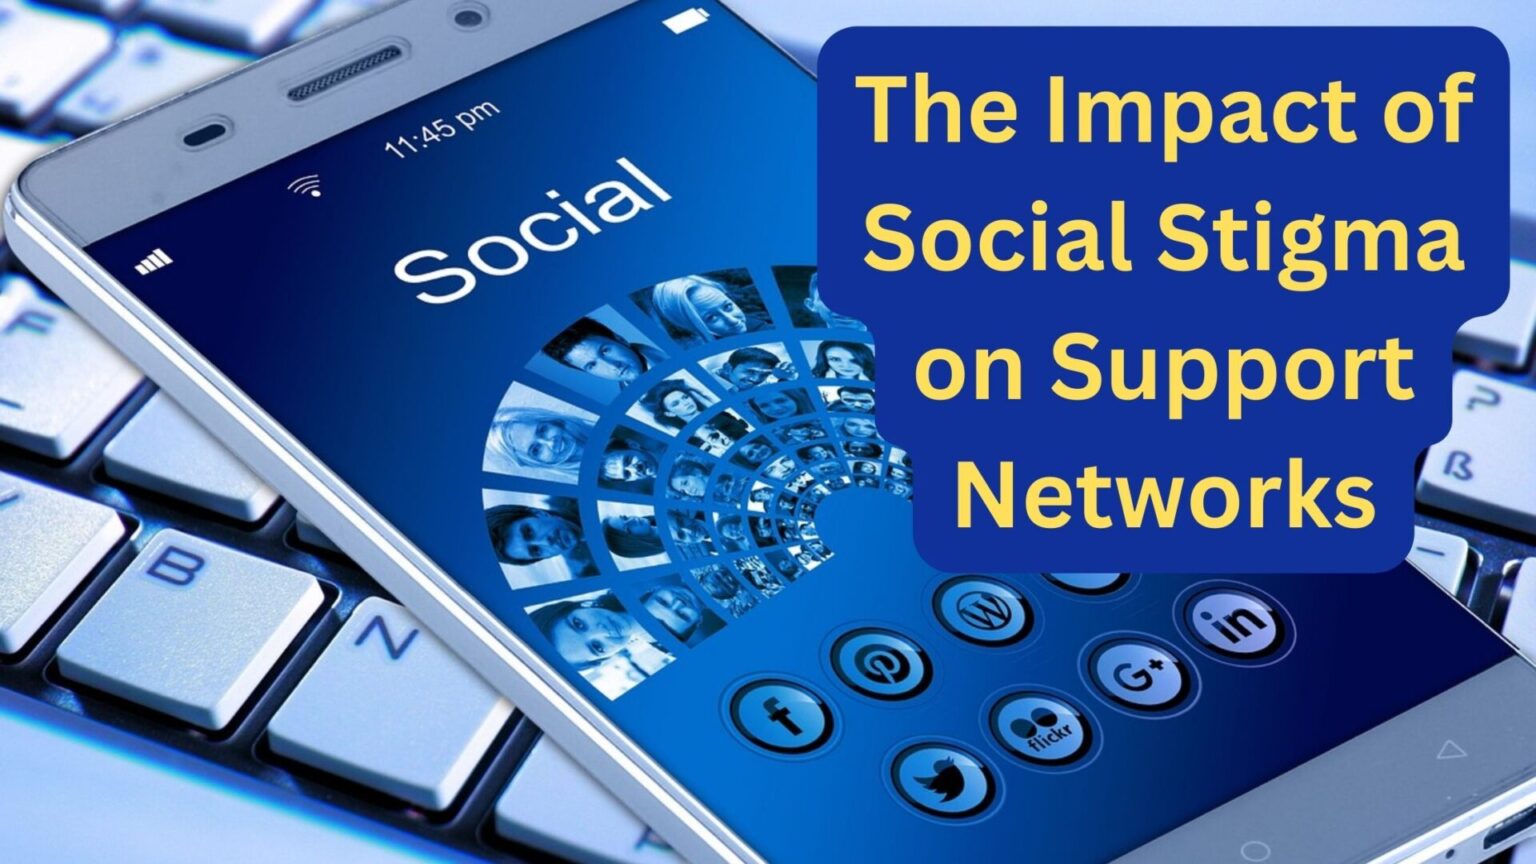 The Impact of Social Stigma on Support Networks